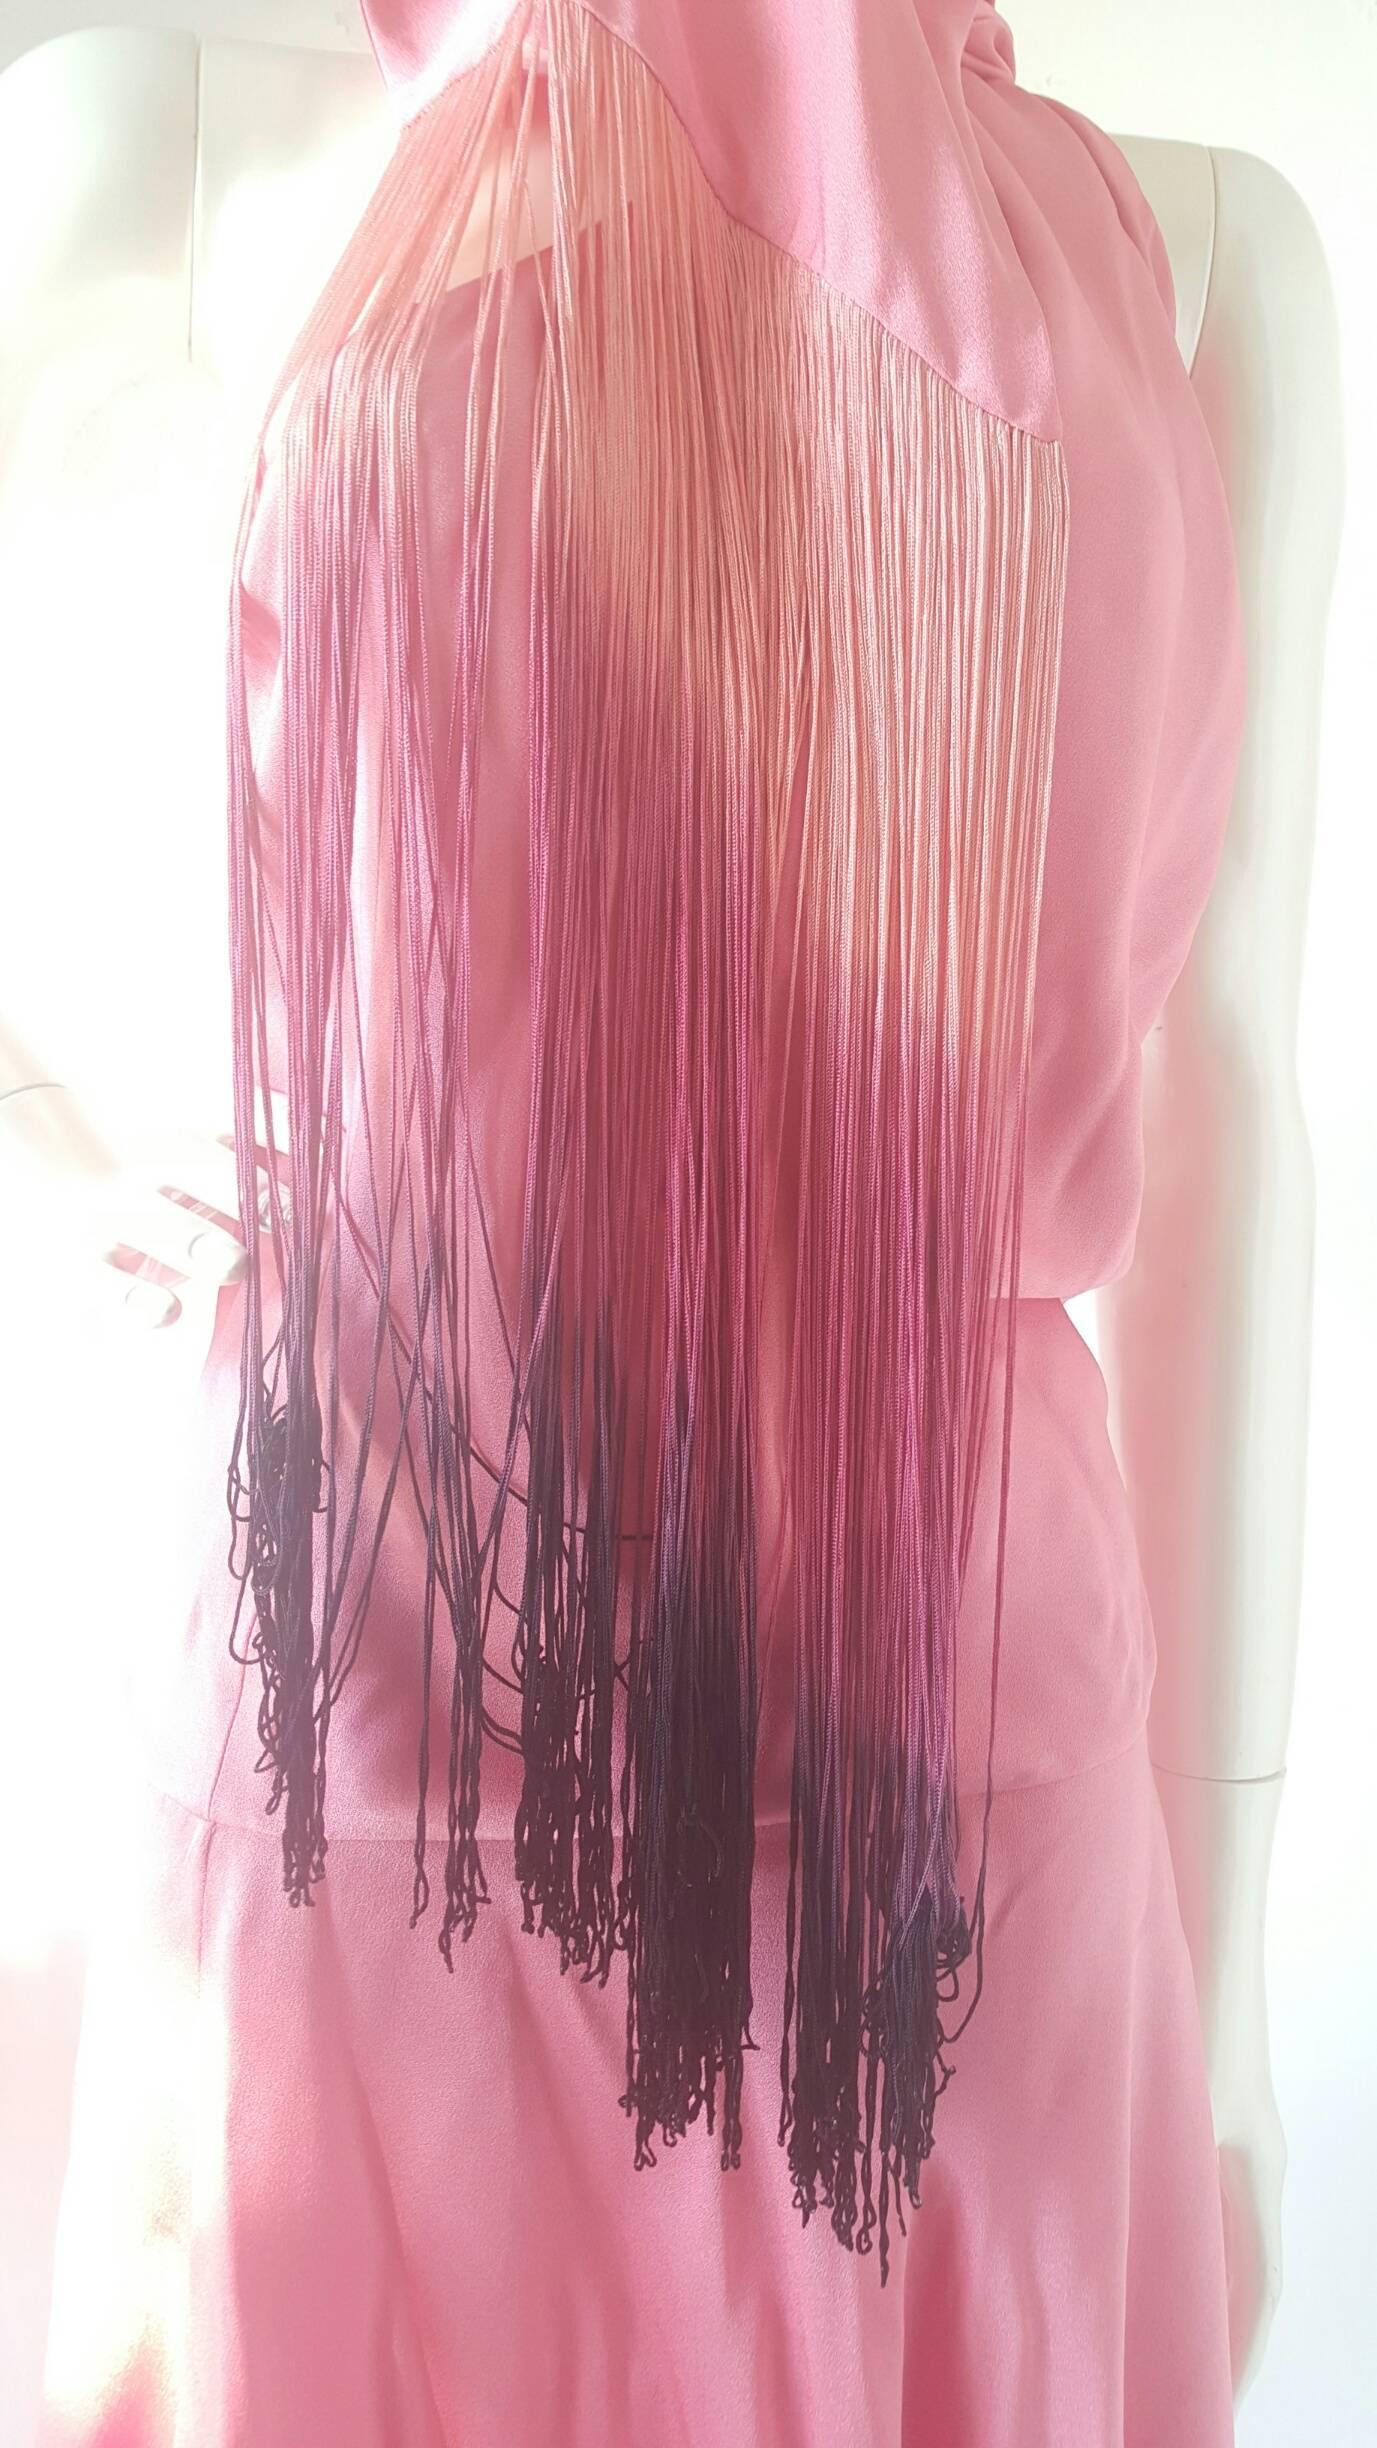 ABITO ALEXANDER MCQUEEN PINK DRESS 
NEW WITH TAGS

Fucsia silk dress with long wrap around scarf trimmed with ombre dyed fringe from Alexander McQueen dating to 2007. Labeled an Italian size 42, which best fits a US size 6. Zip entry at side with